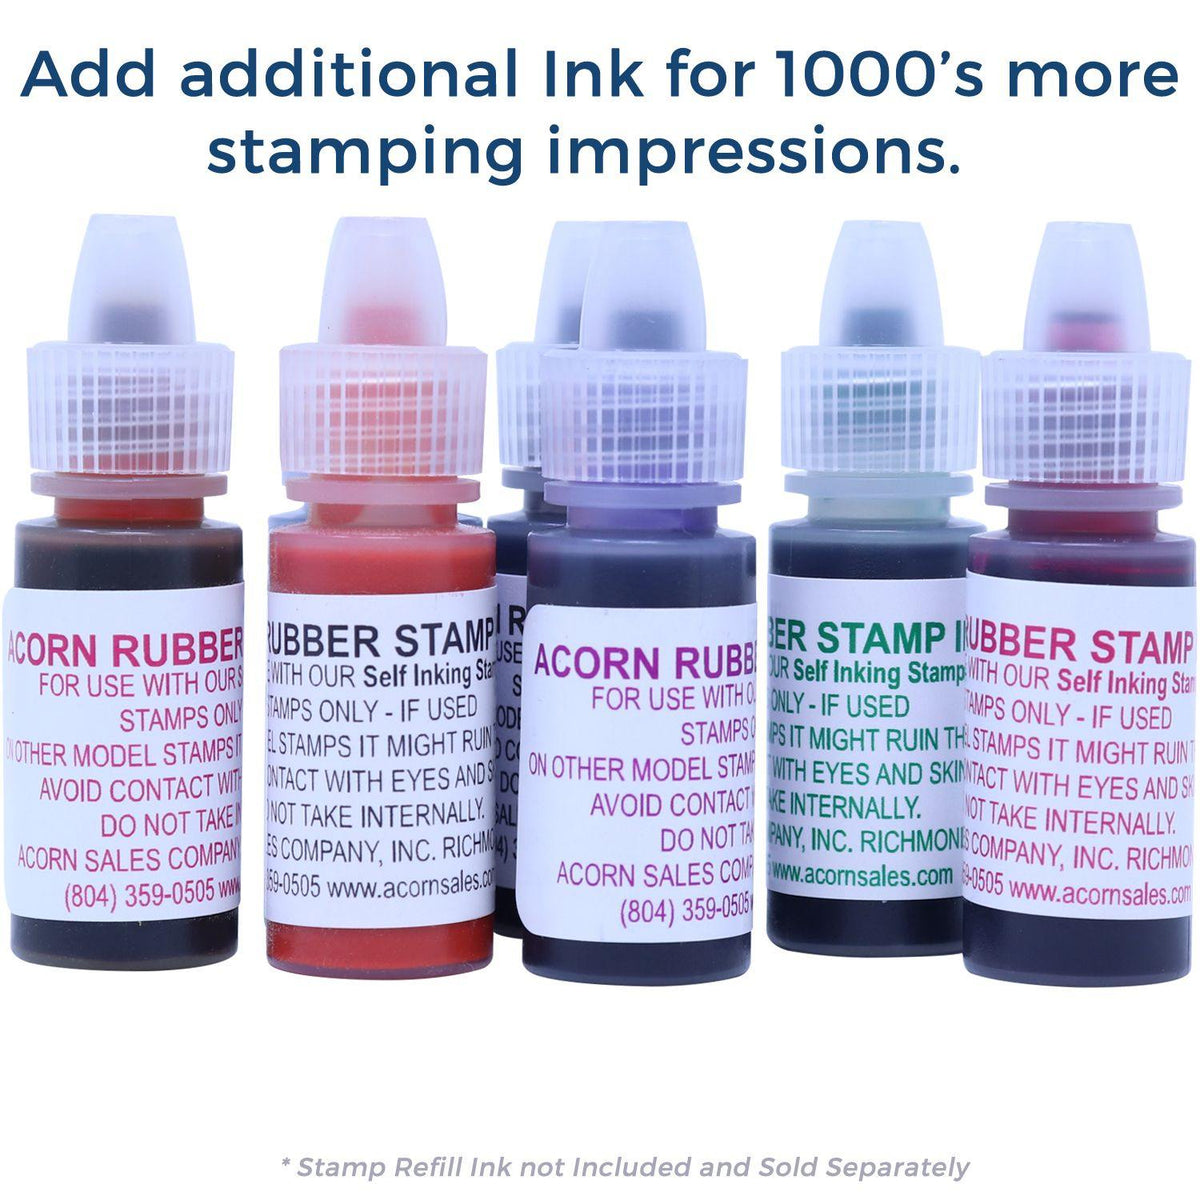 Refill Inks for Large Pre-Inked Postage Due Stamp Available